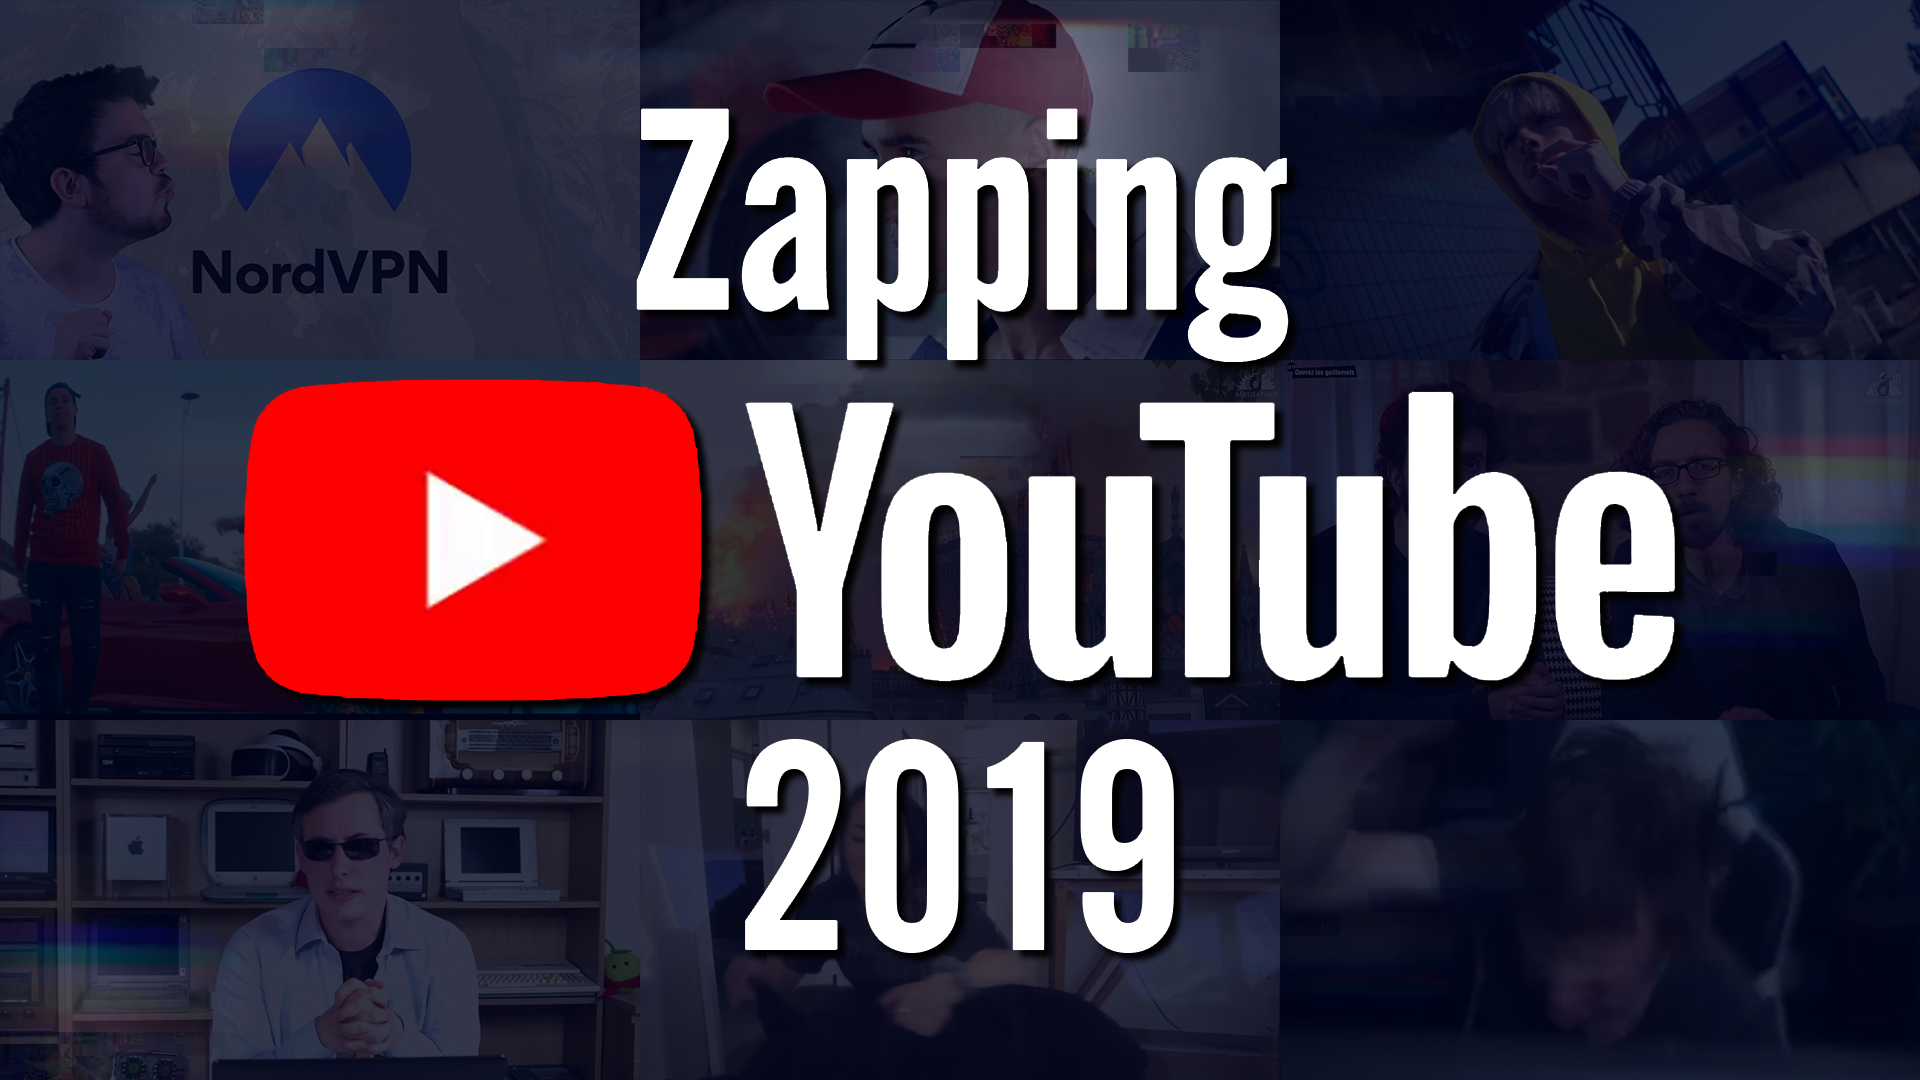 Zapping YouTube 2019